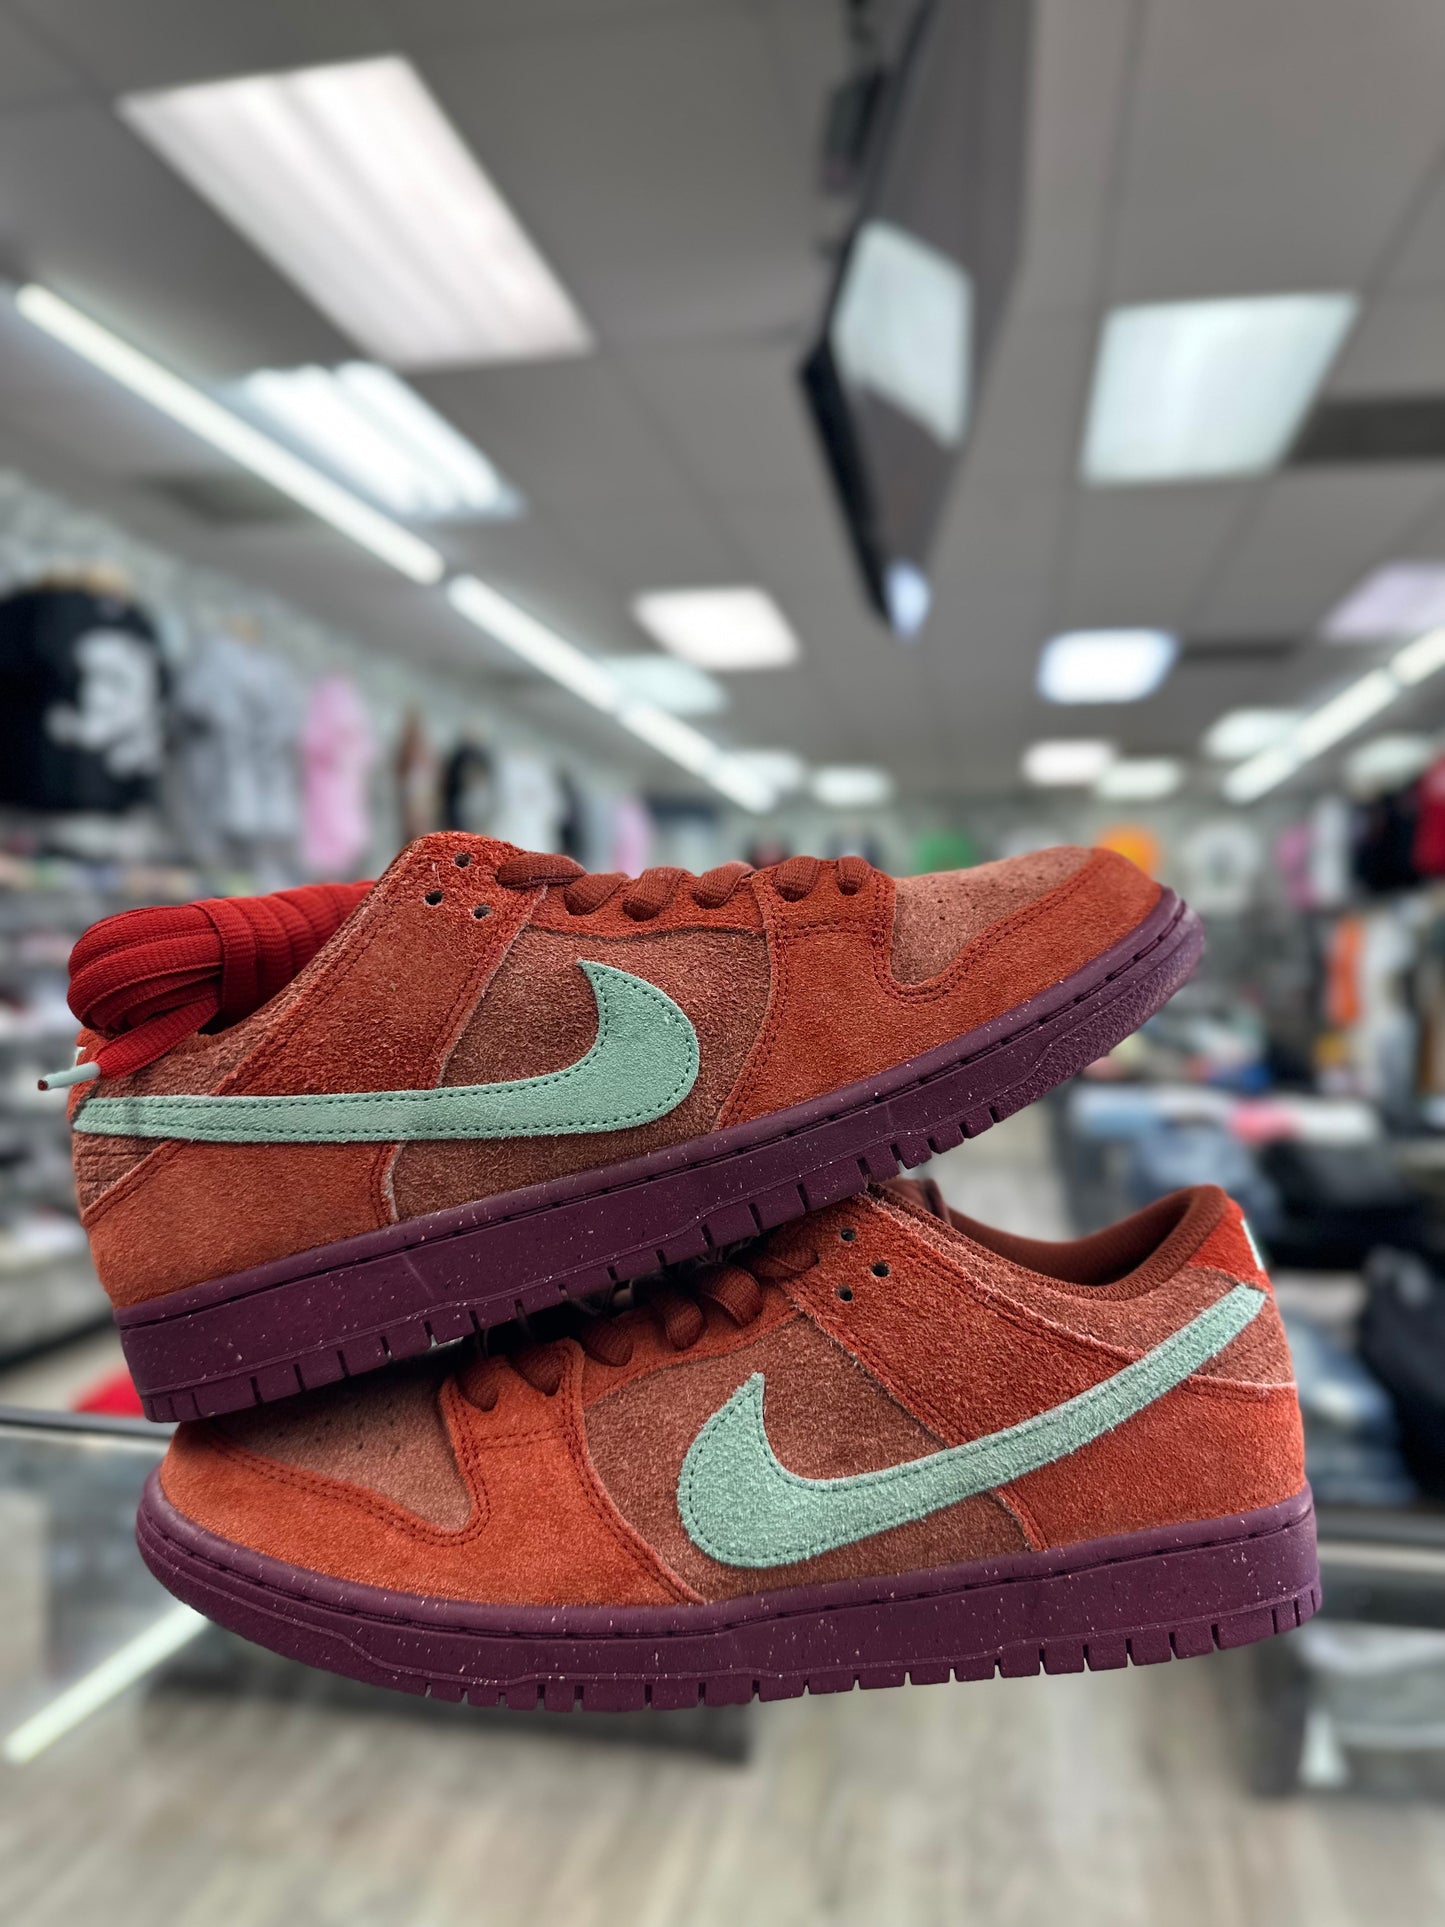 The Nike SB Dunk Low 'Mystic Red' is pretty spicy for a skateboarding  sneaker